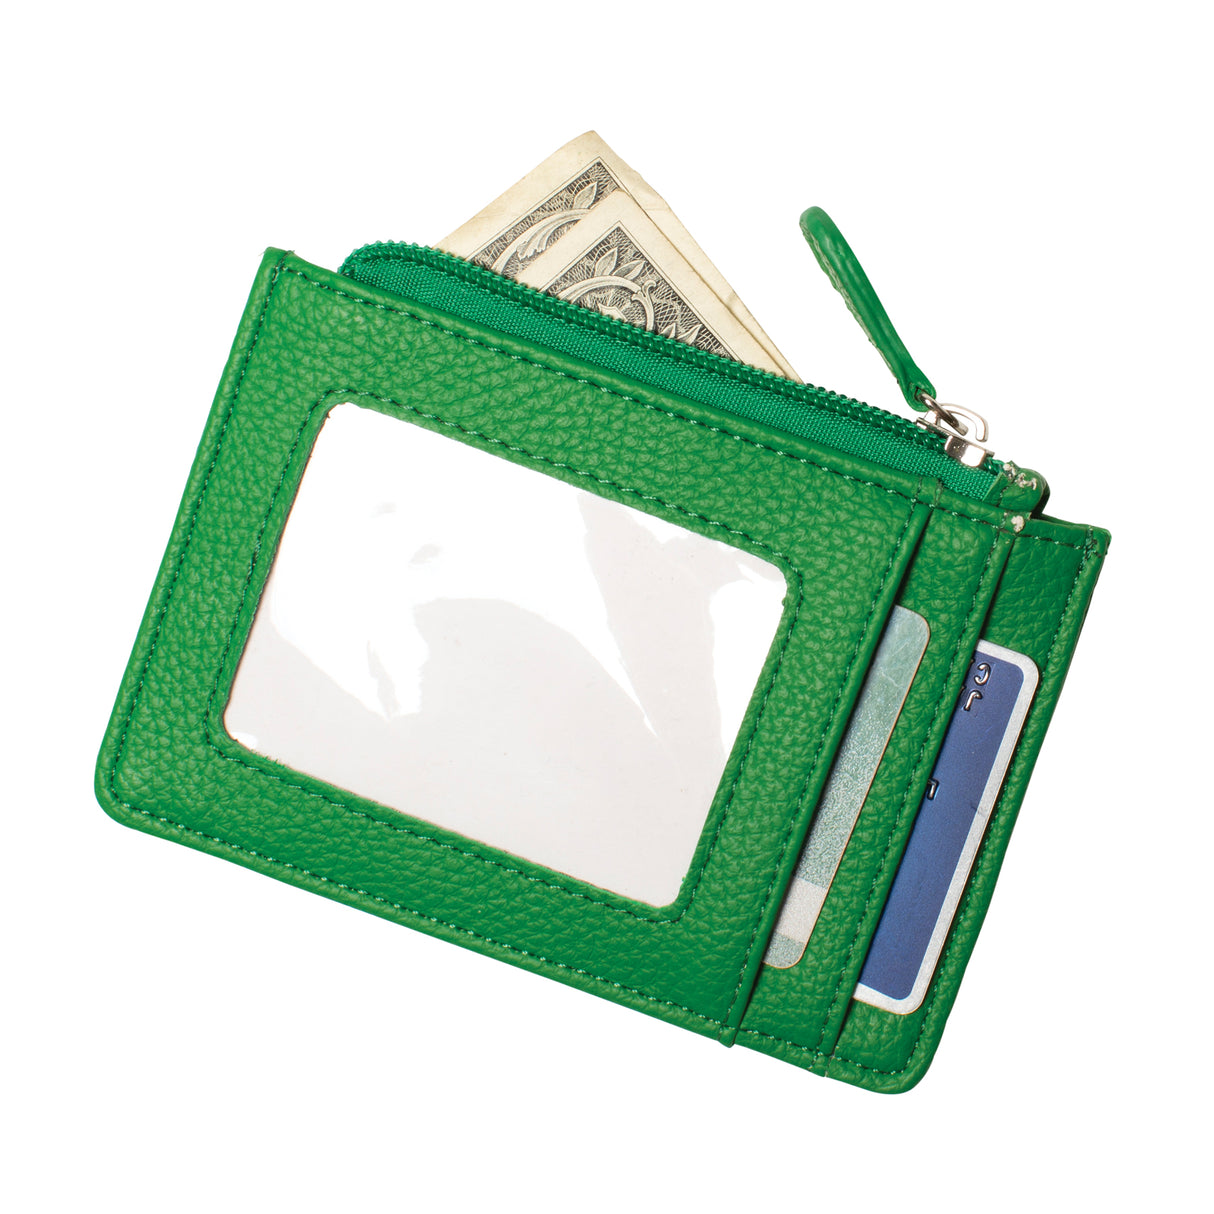 Celtic Knot Card Holder and Coin Purse - Creative Irish Gifts